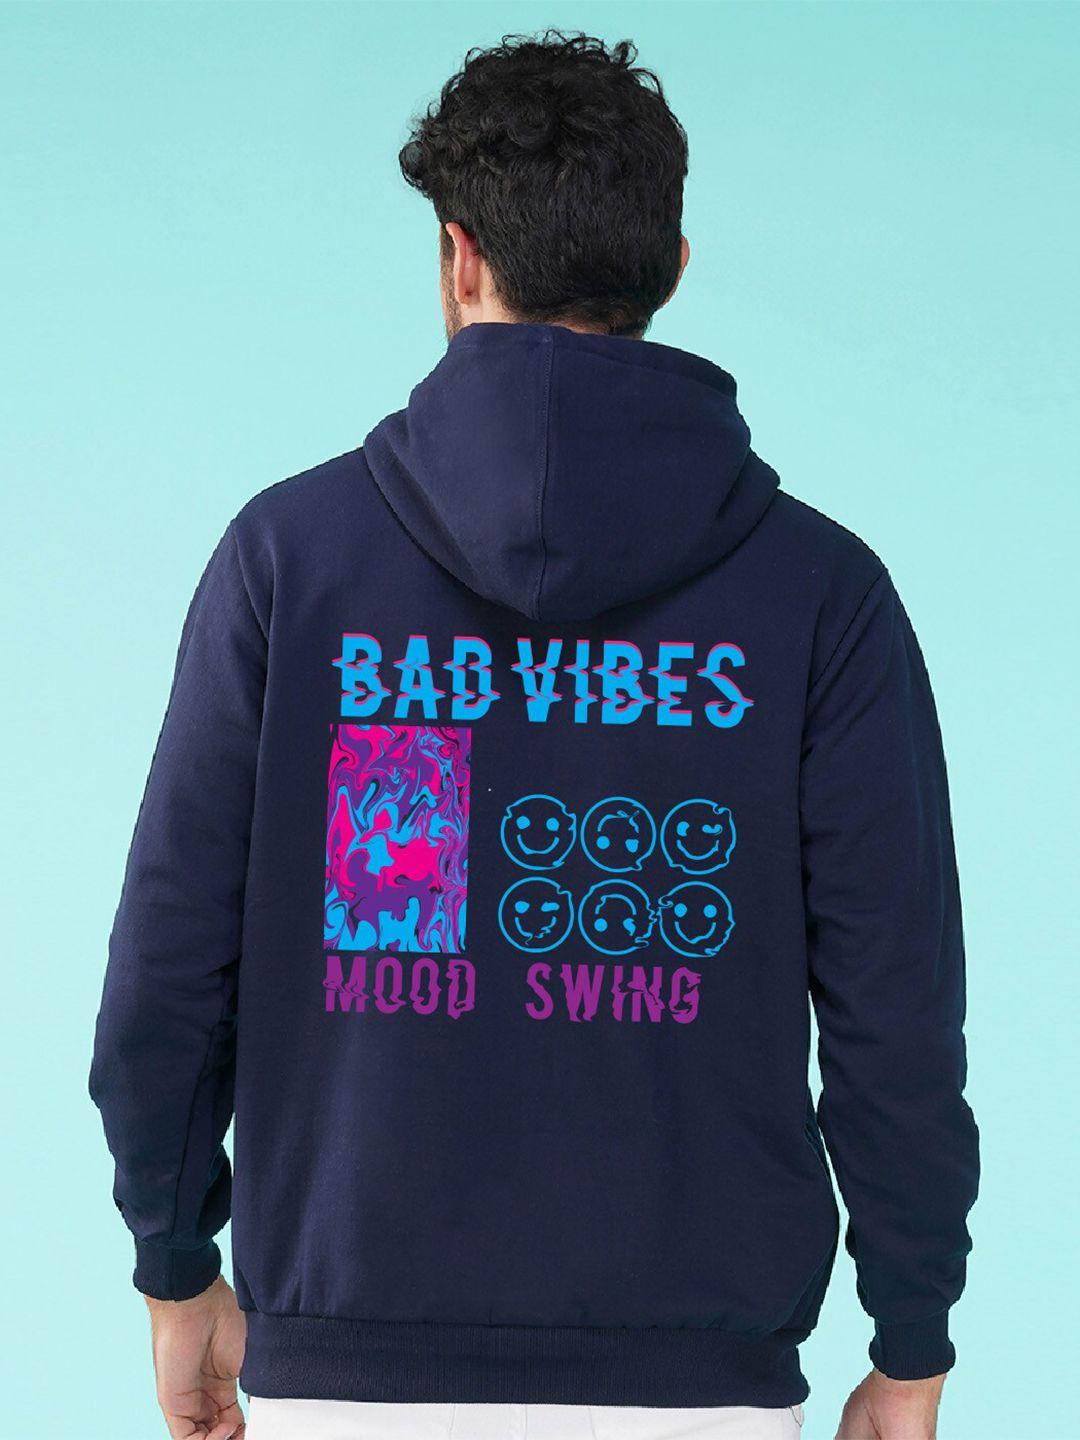 nusyl graphic printed hooded pullover